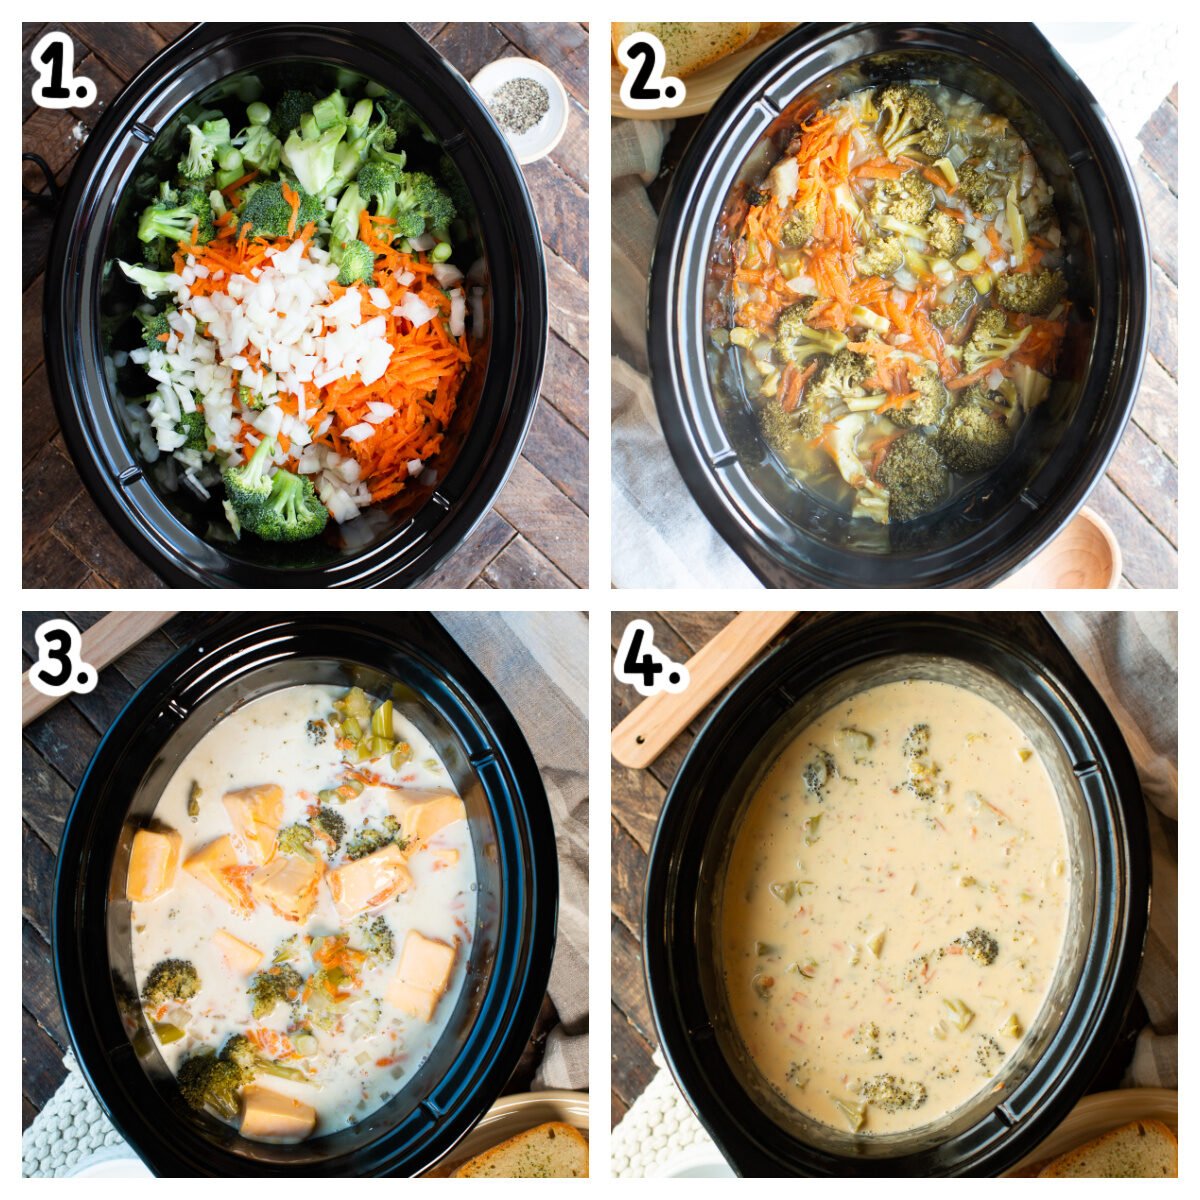 4 images showing how to make broccoli cheeese soup in the crockpot.